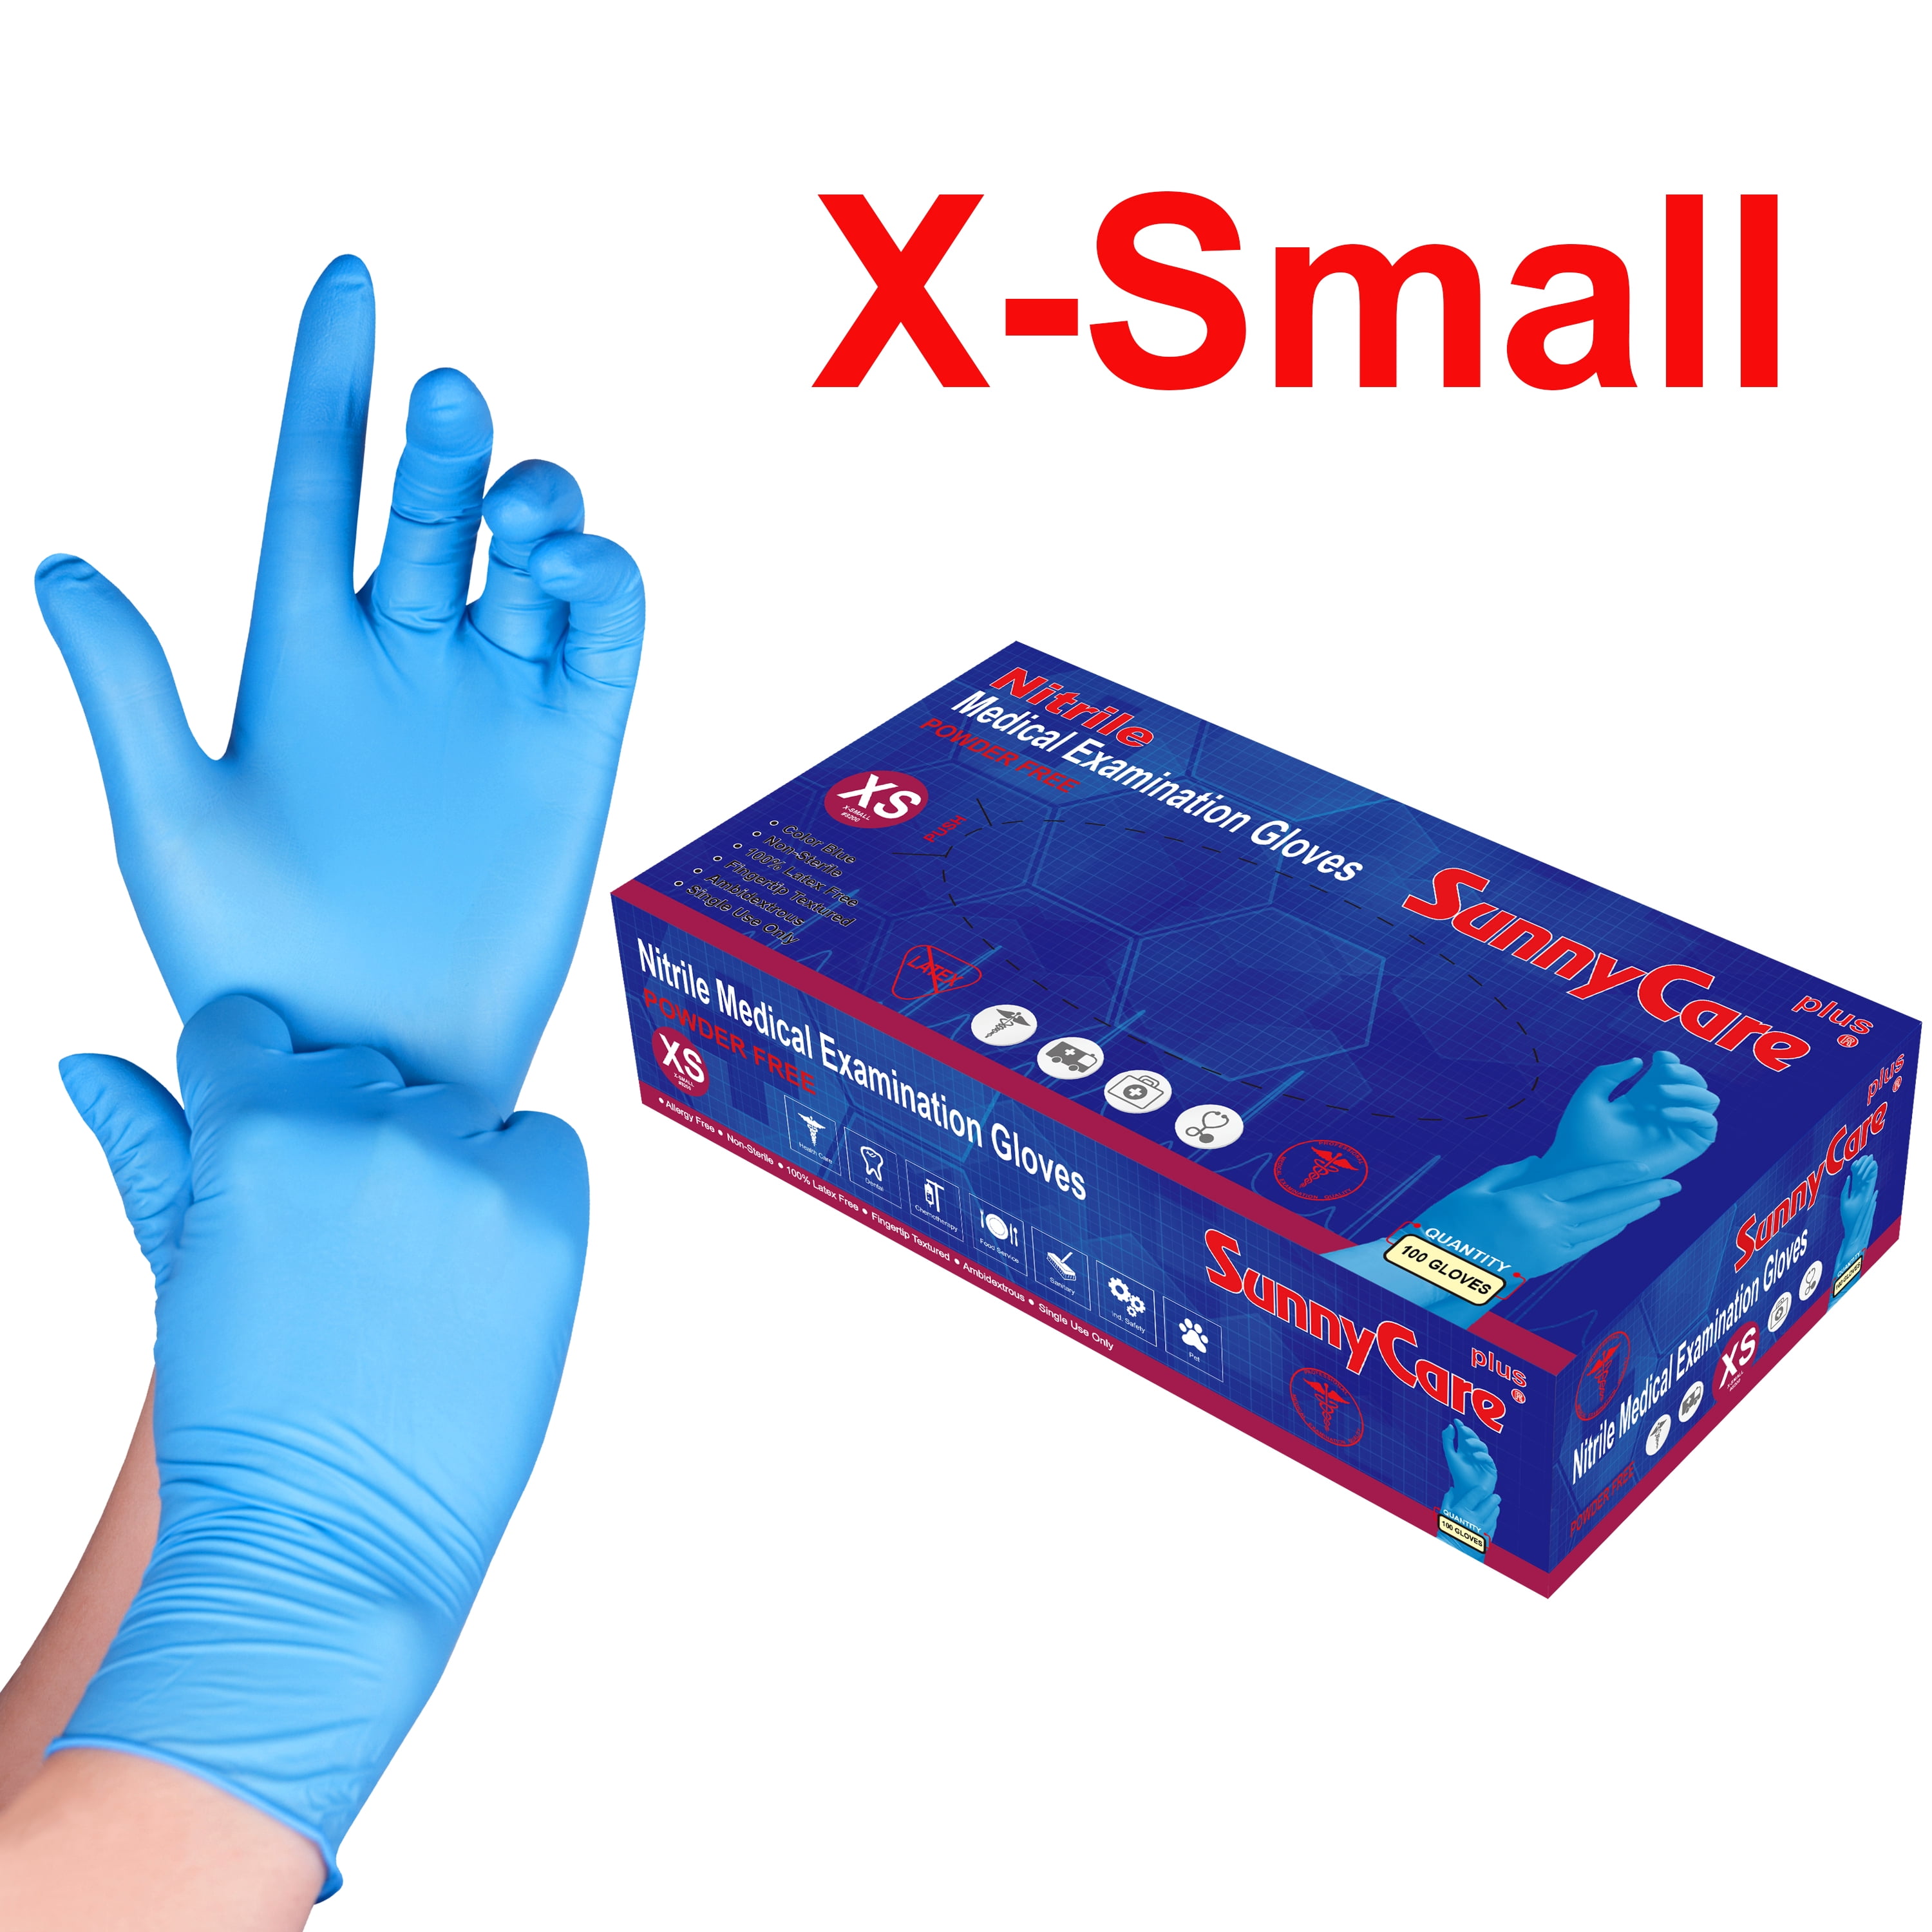 50Pairs Purple Large Disposable Waterproof Tear Resistant Exam Powder Free Gloves Harmful Chemical Resistant Industrial Surgical Medical Hairdressing Wear Glove 